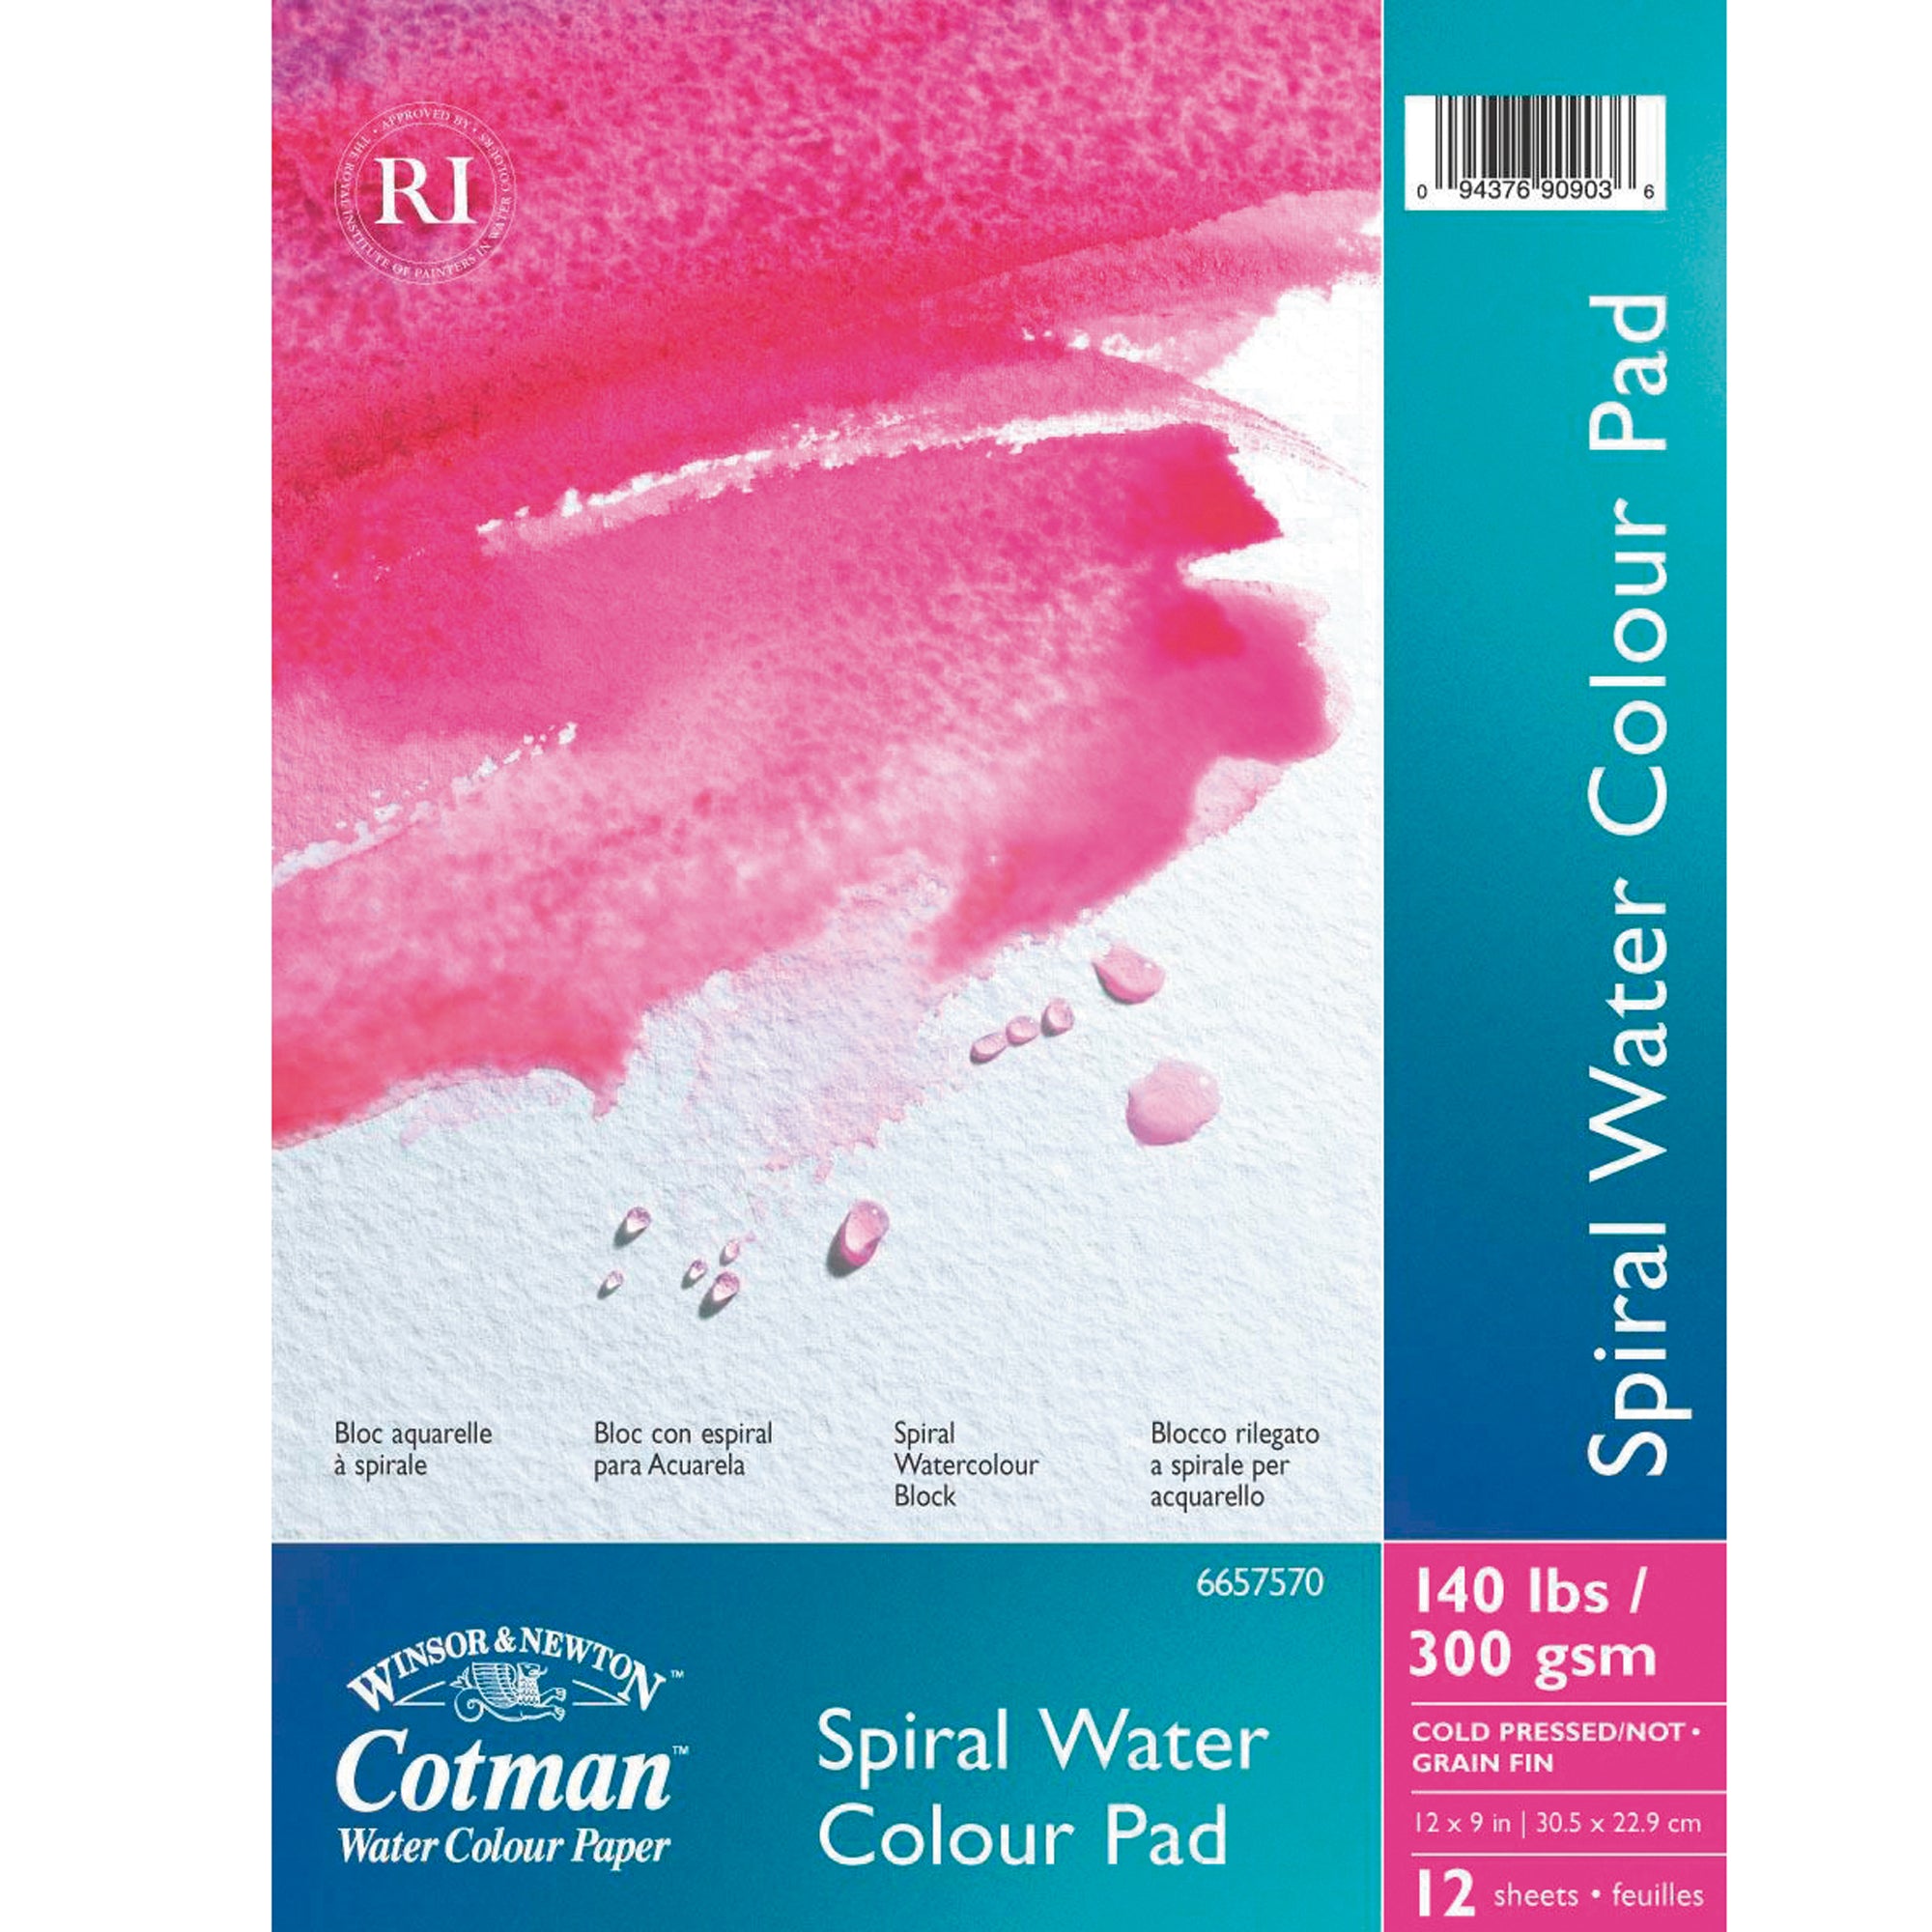 Winsor & Newton Cotman Spiral Water Colour Paper Pad - Cold Pressed / NOT 300gsm